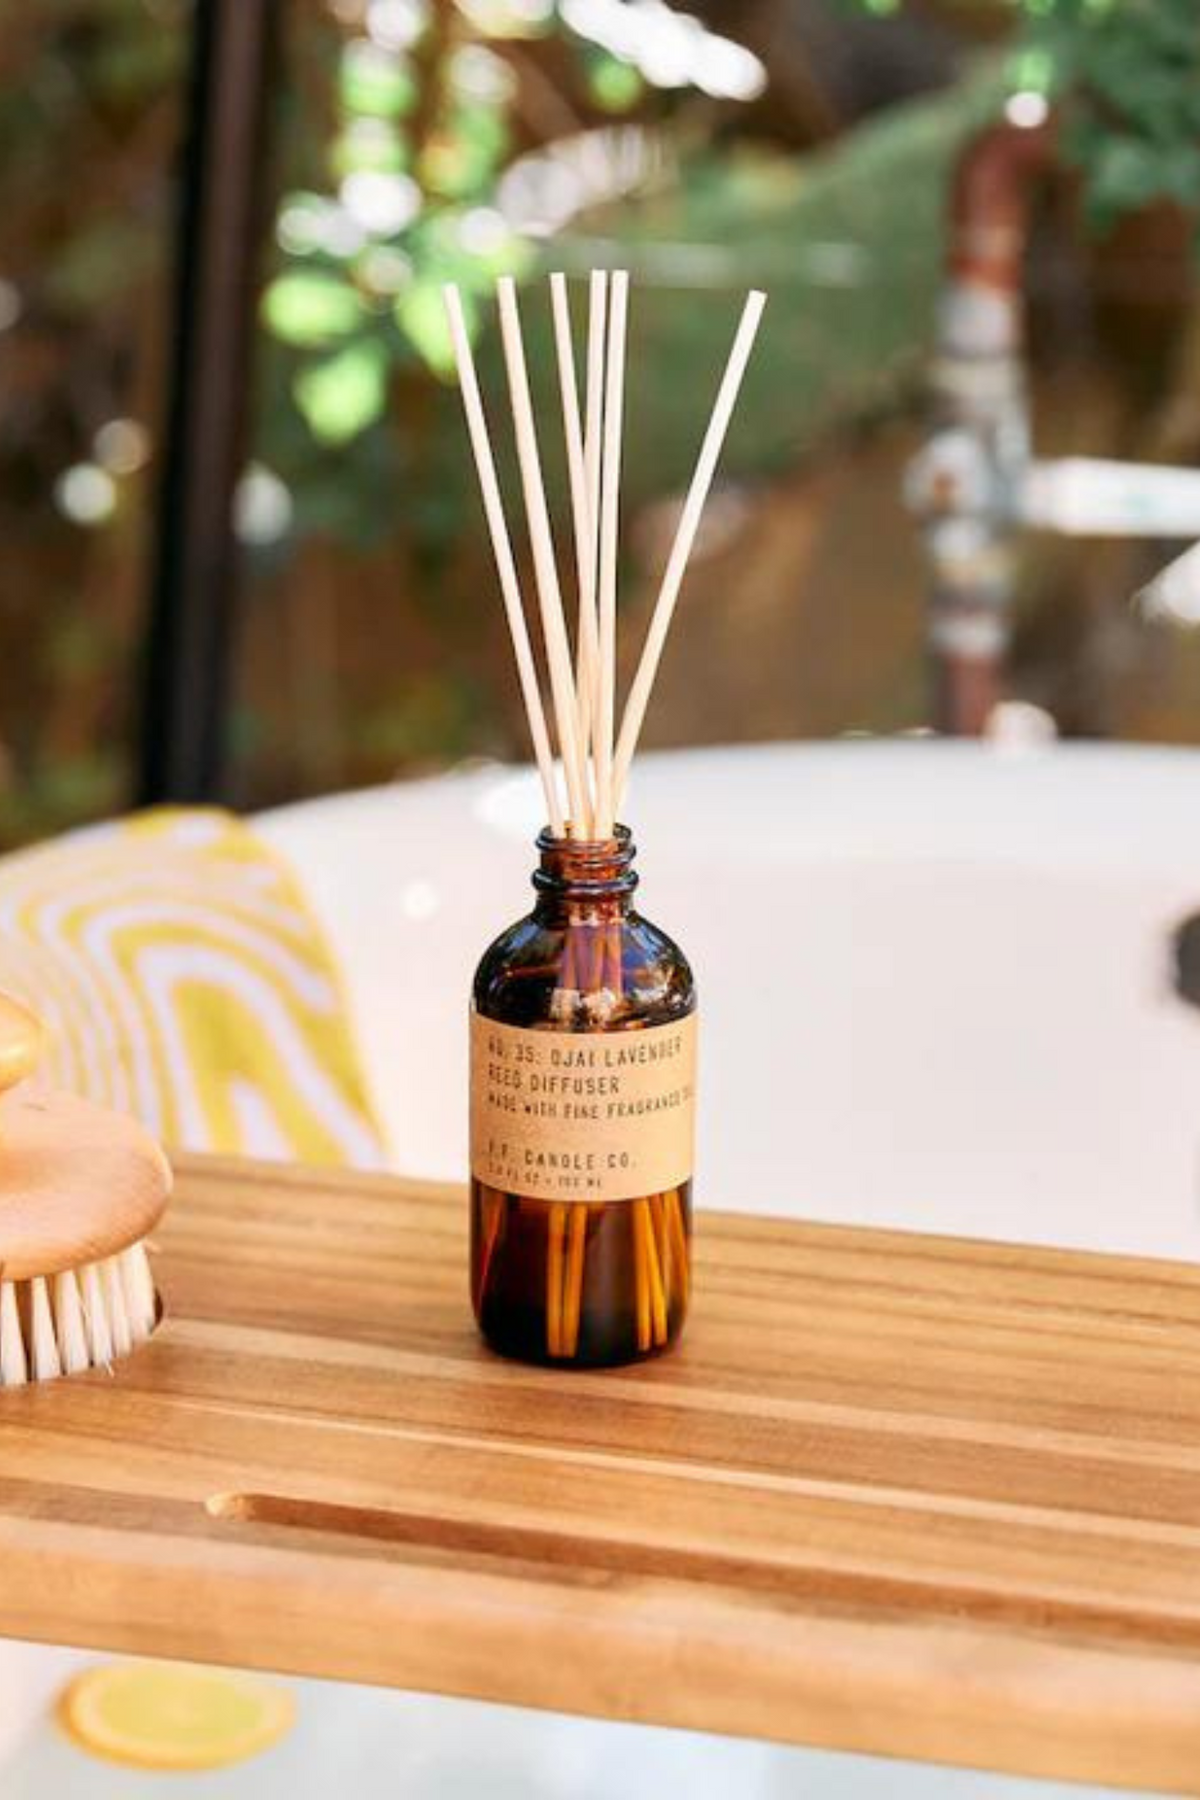 P.F. Candle Co. Ojai Lavender Reed Diffuser